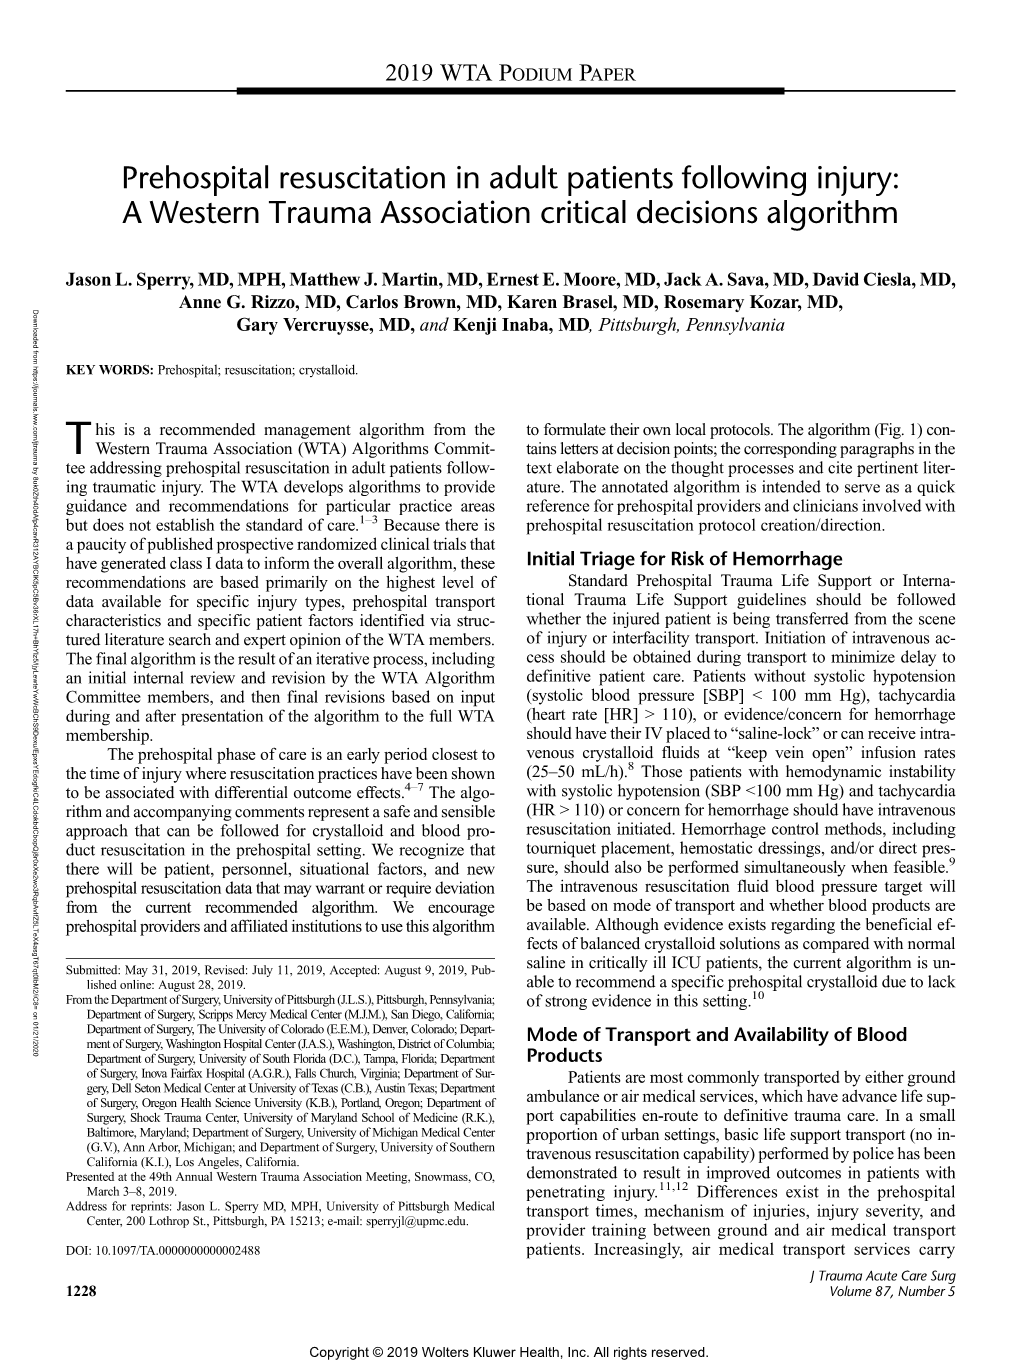 Prehospital Resuscitation in Adult Patients Following Injury: a Western Trauma Association Critical Decisions Algorithm